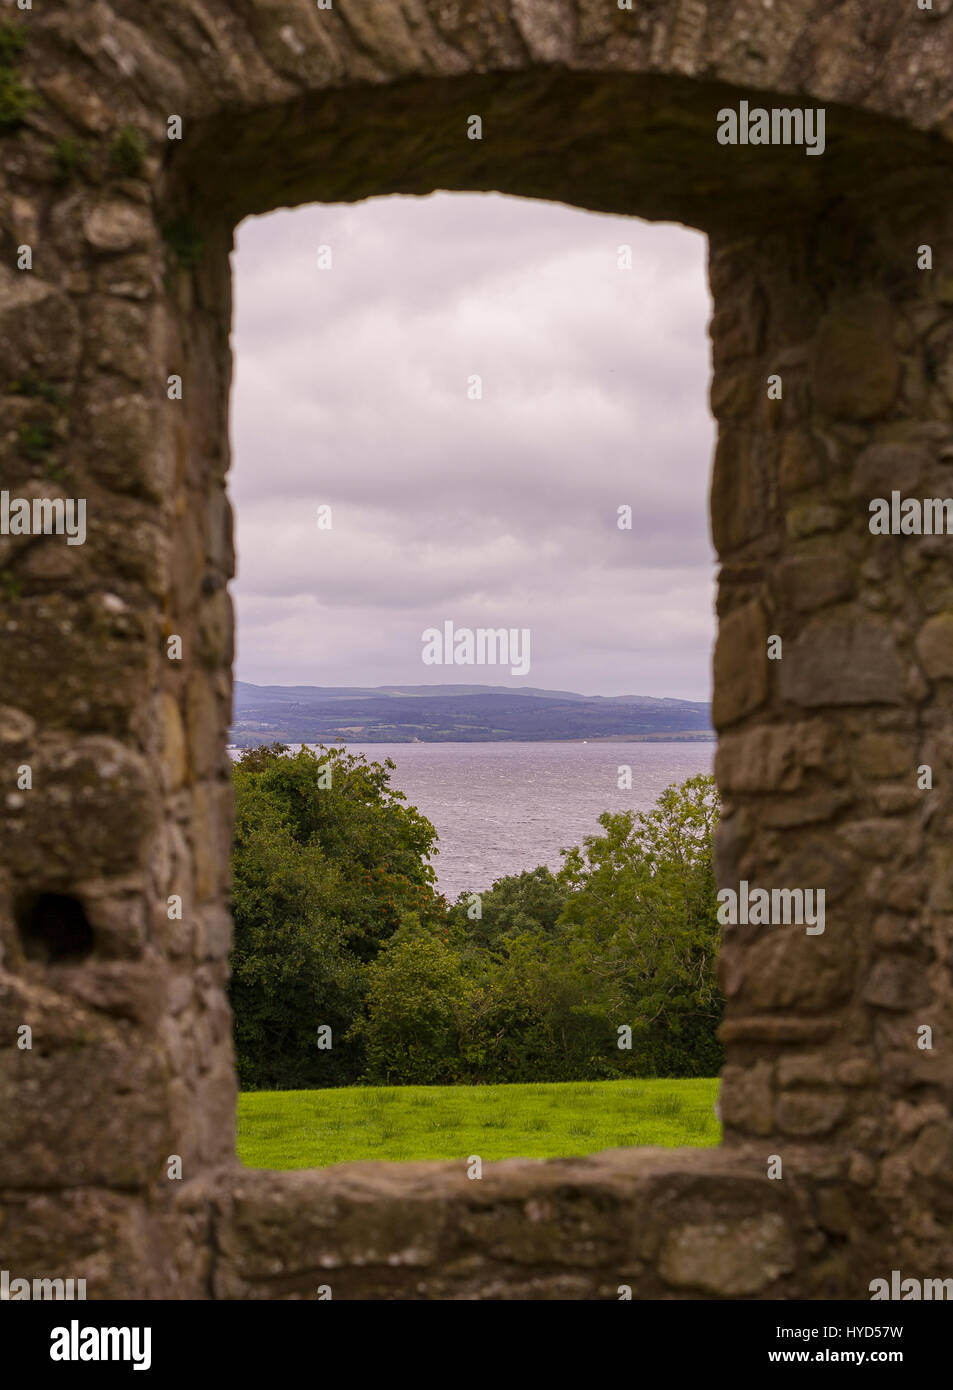 TULLY CASTLE, NORTHERN IRELAND - Ruins of Tully Castle, near Enniskillen, on Lower Lough Erne. Tully Castle, built early 1600s, in County Fermanagh, near the village of Blaney. Stock Photo